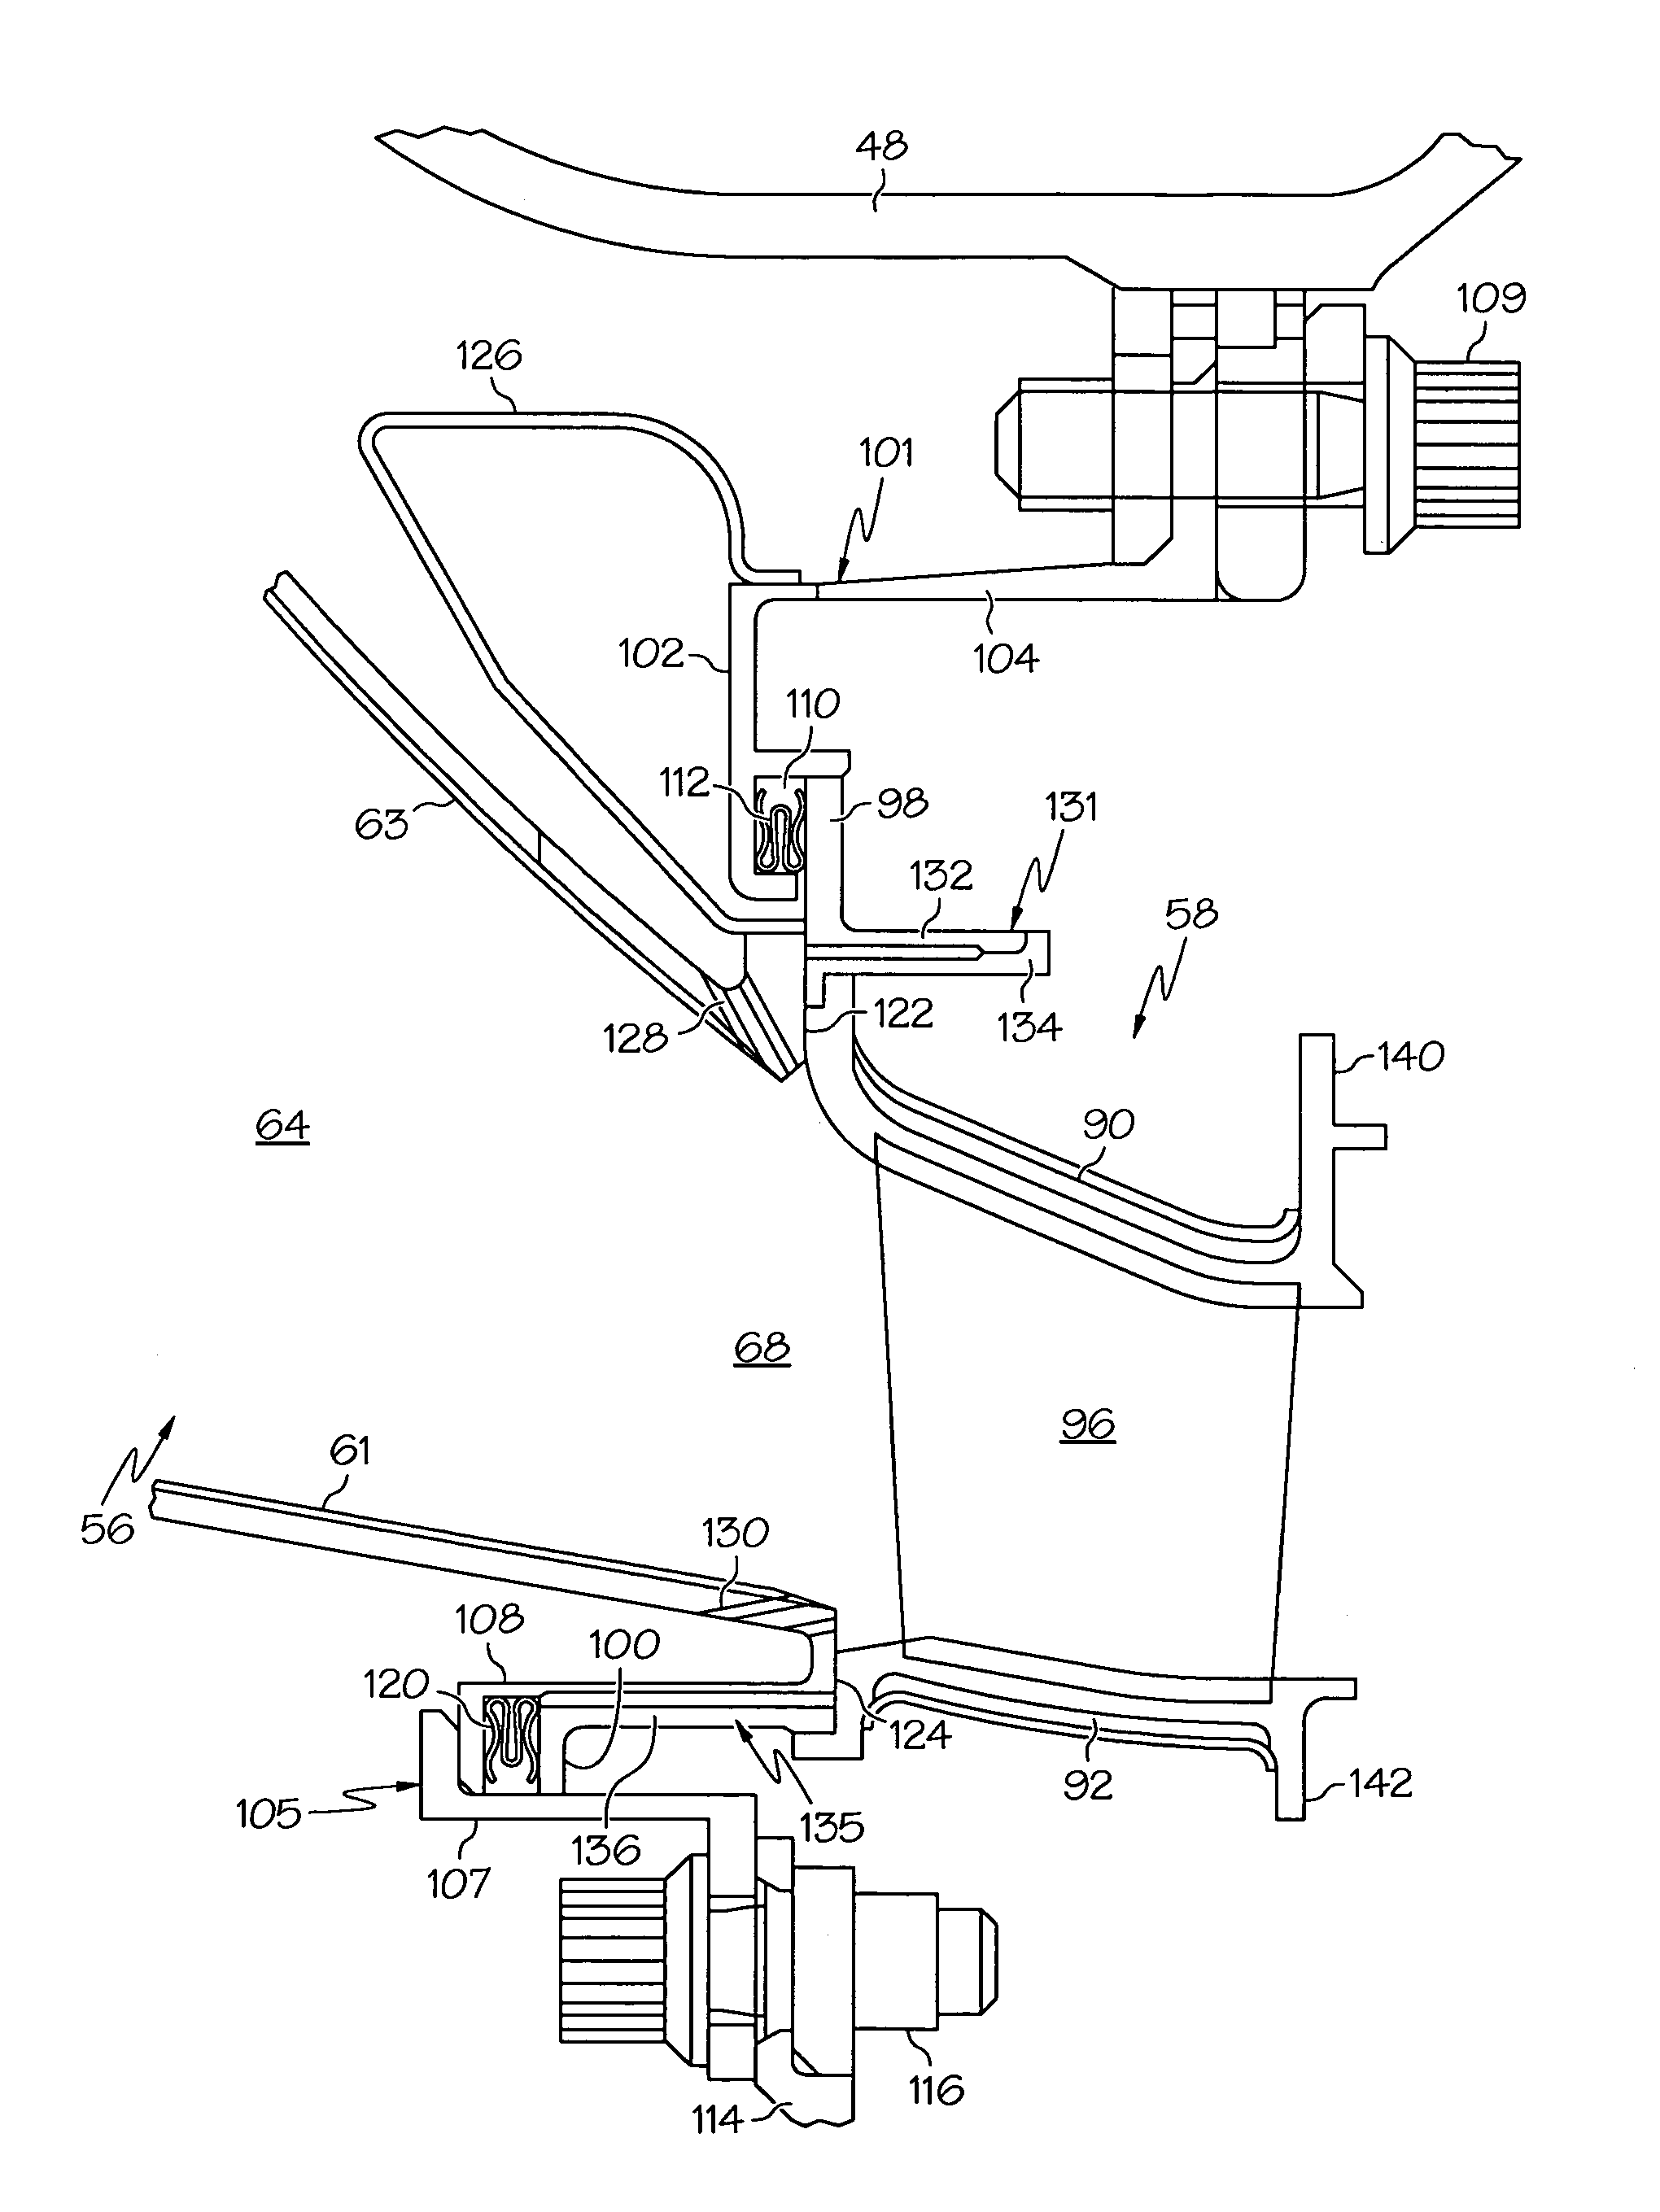 Turbine nozzle assembly including radially-compliant spring member for gas turbine engine